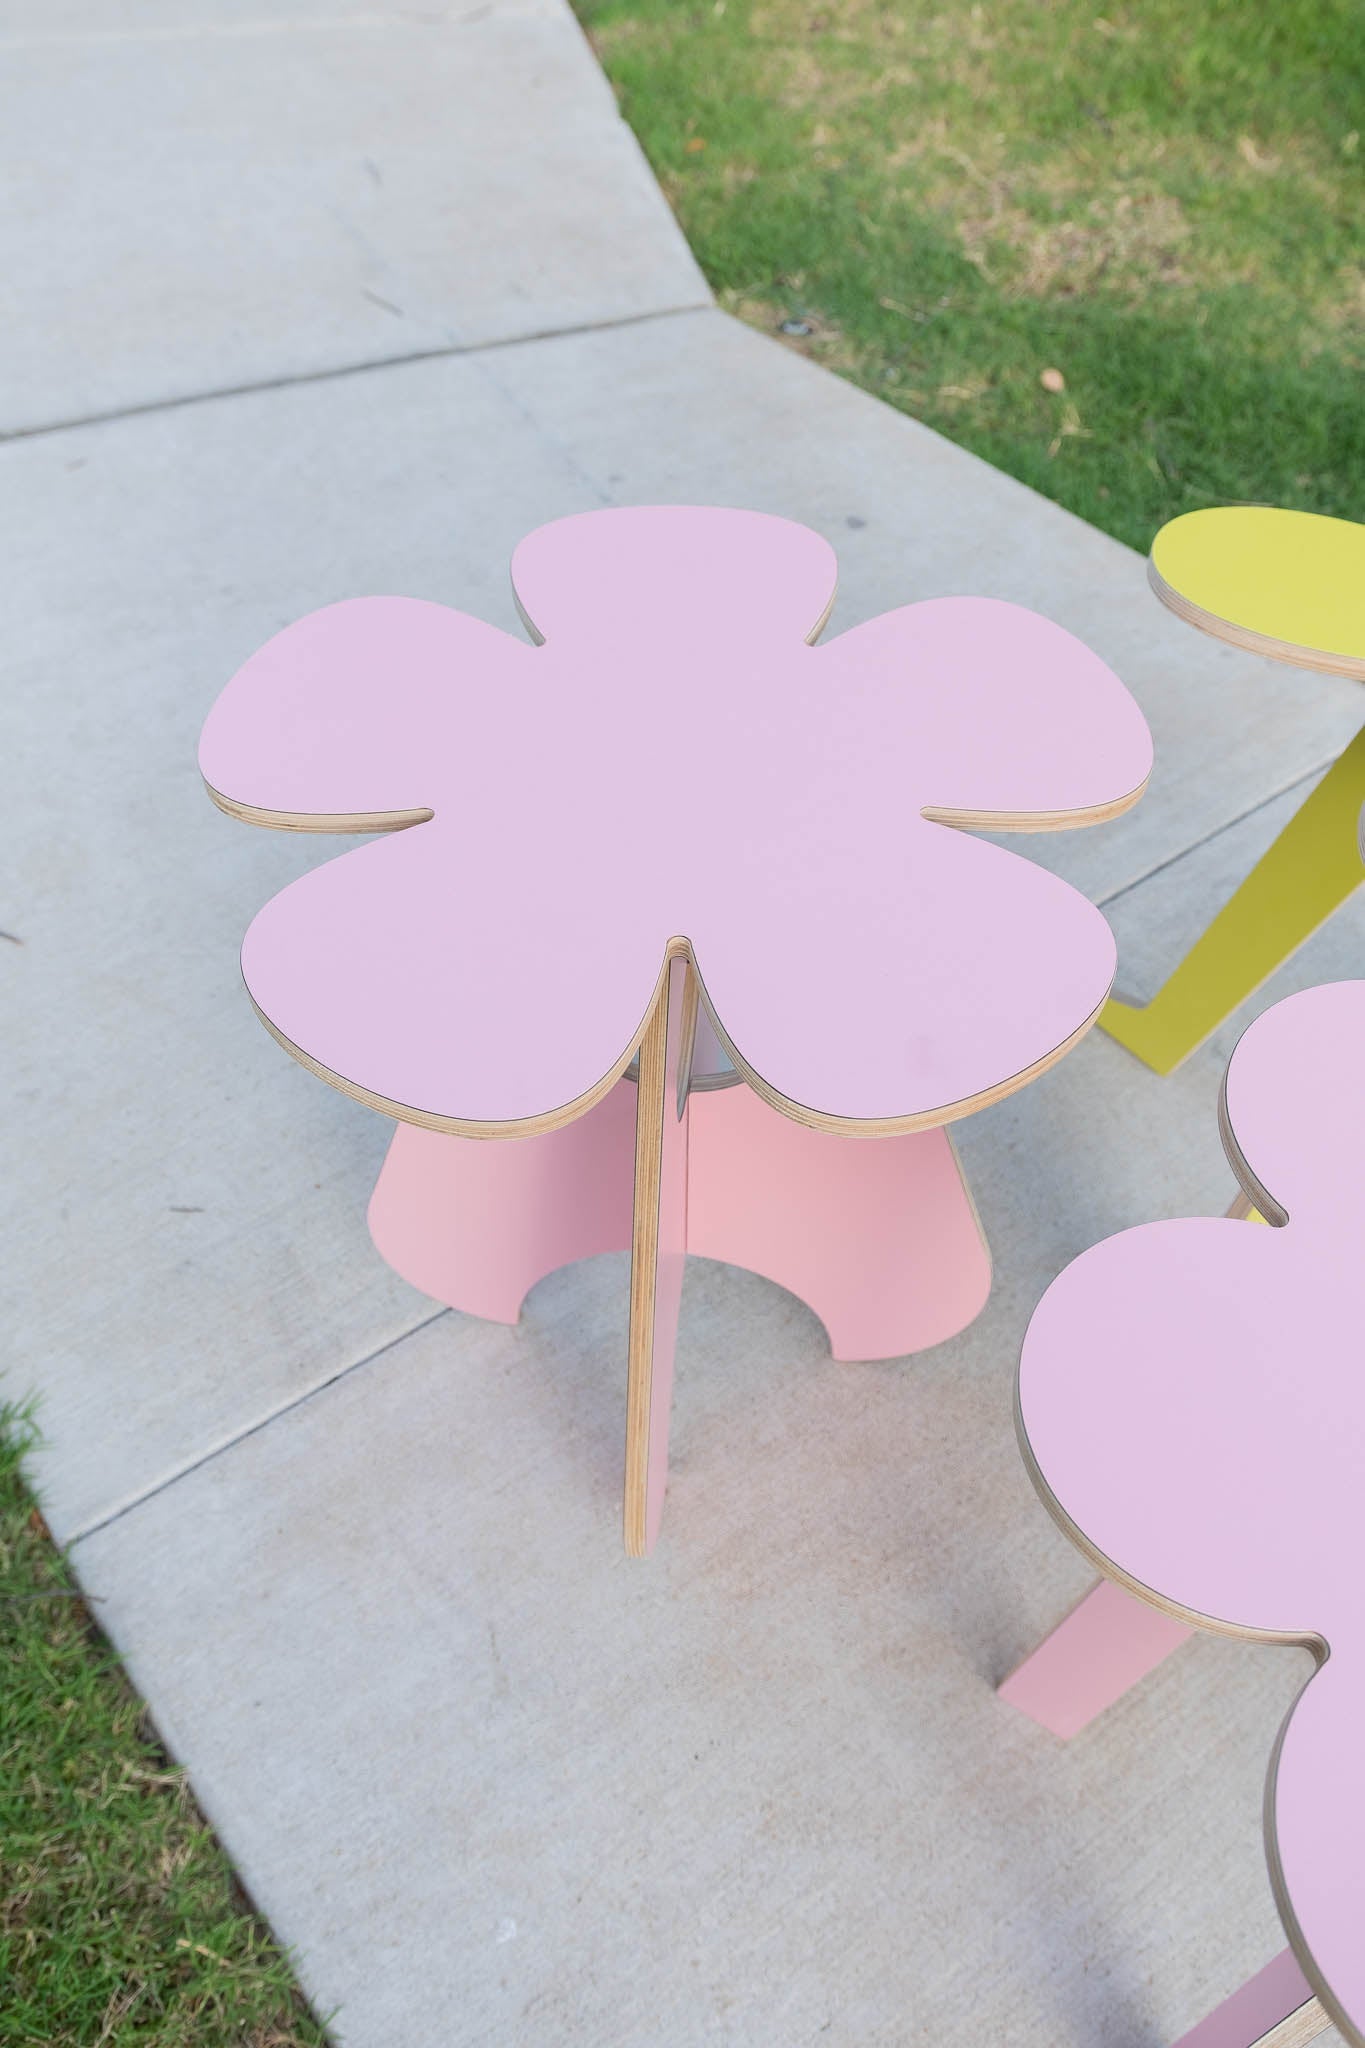 flower no. 4 side table in all pink